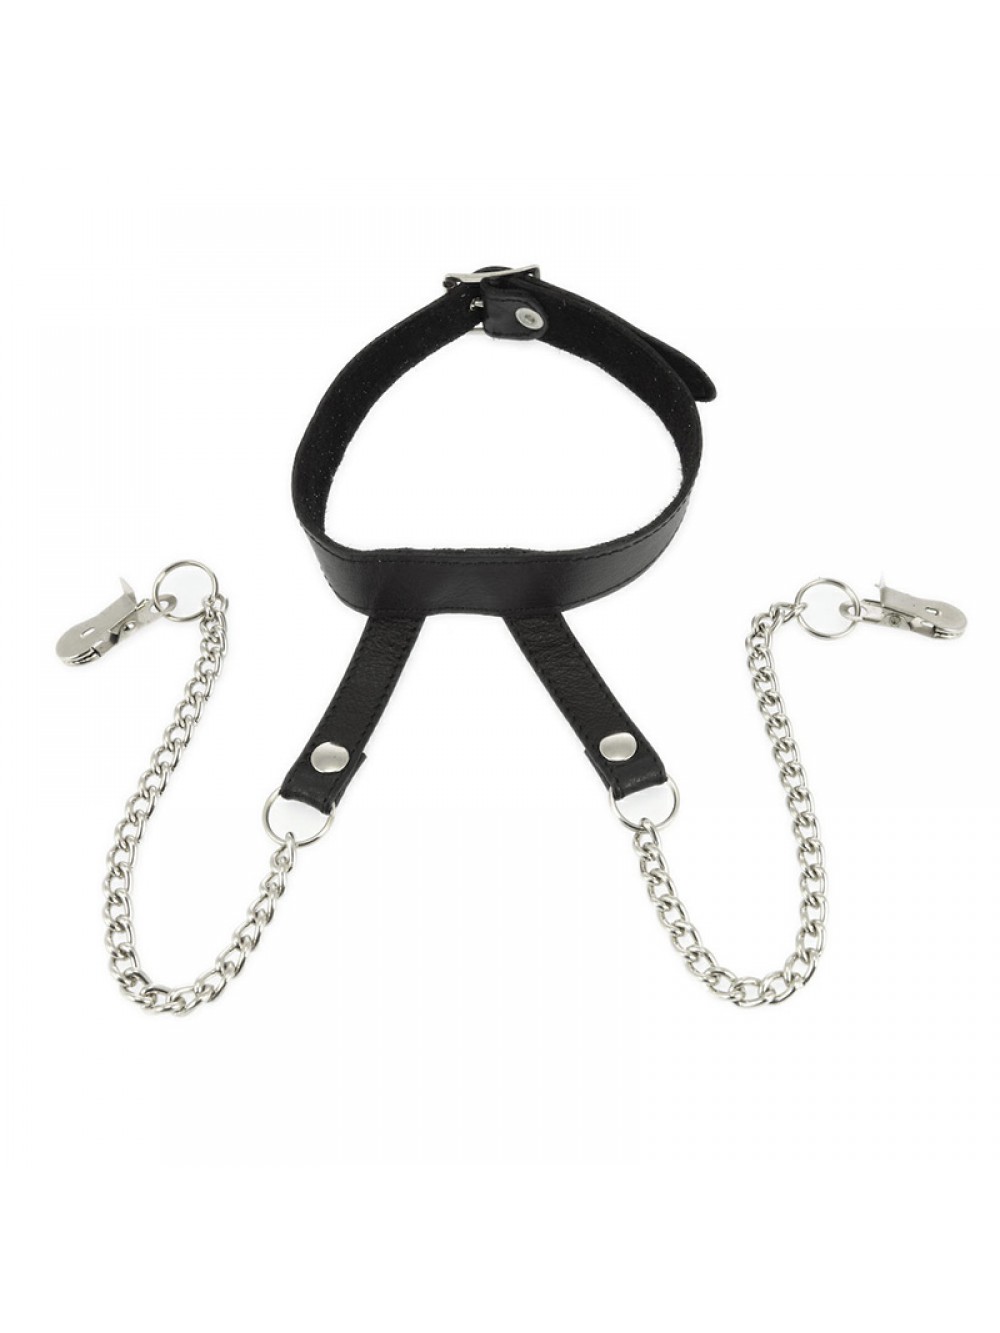 Nipple Clamps With Neck Collar